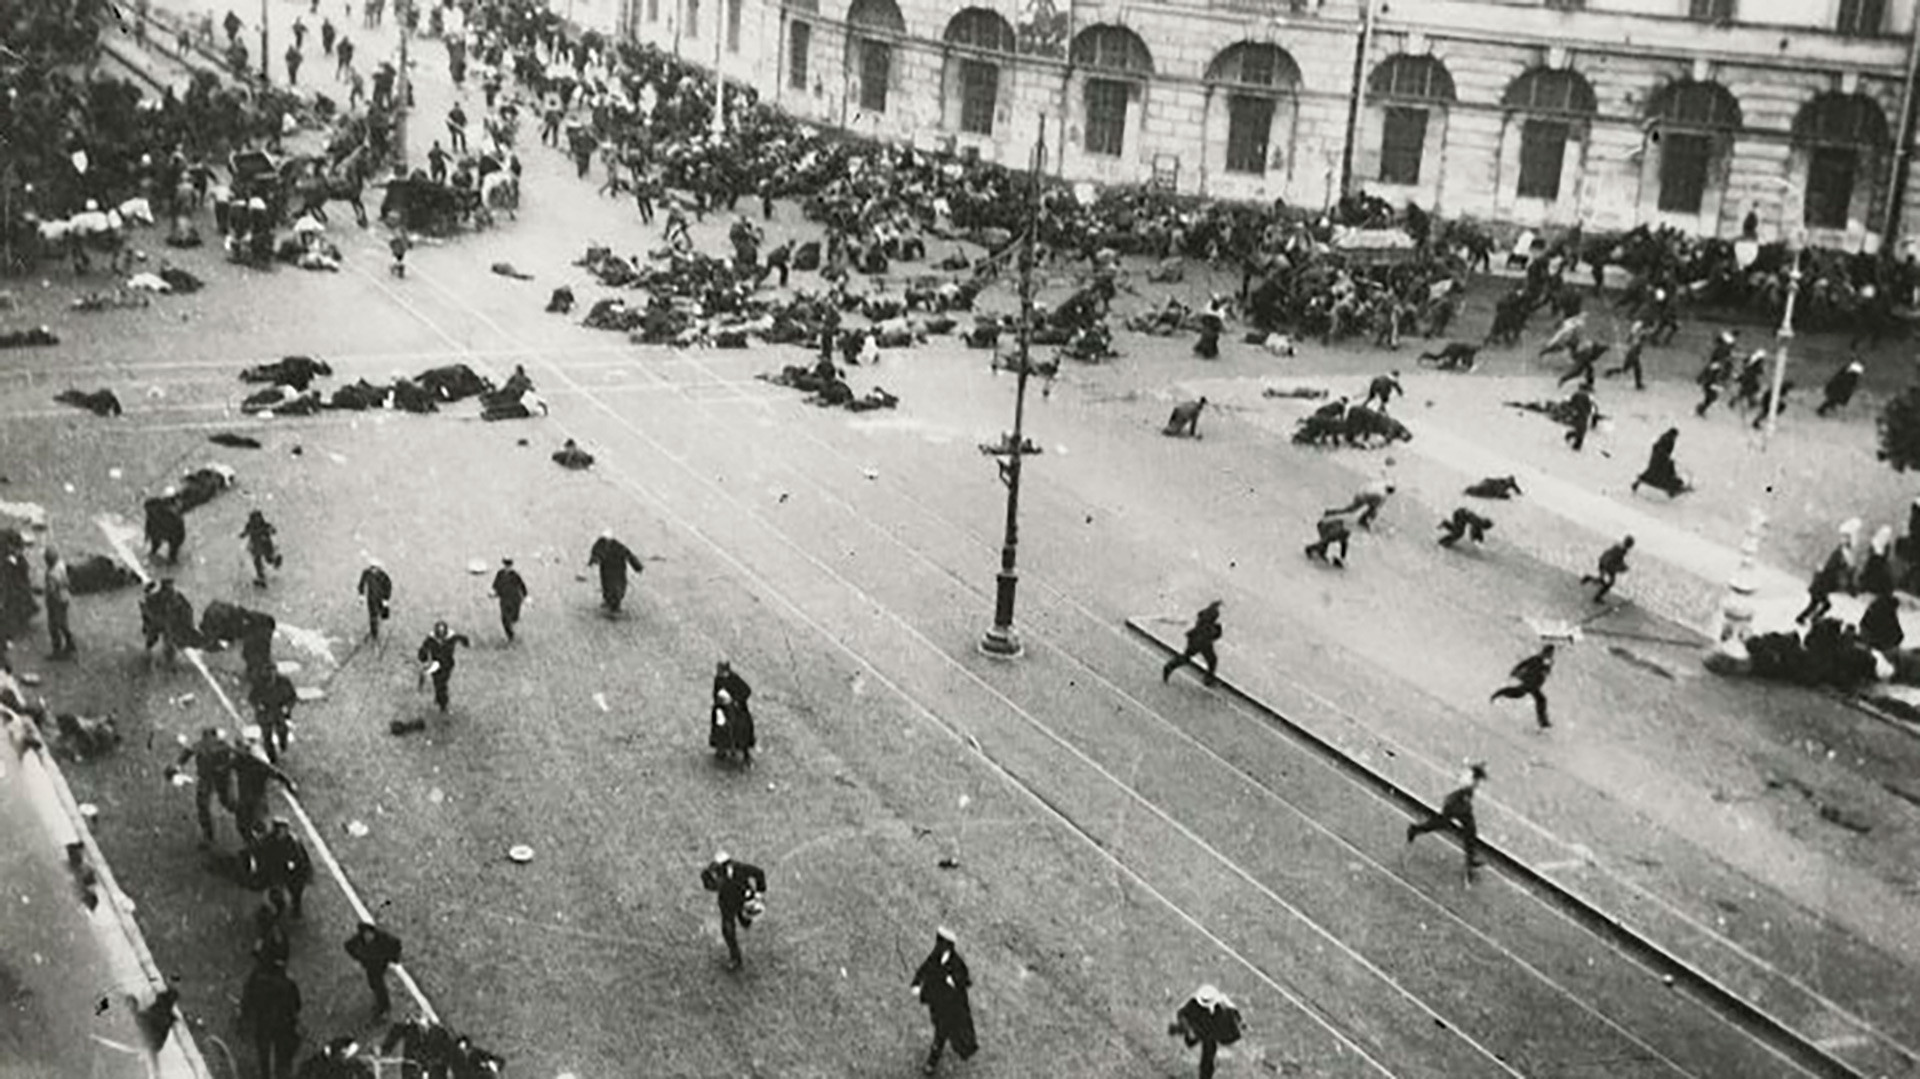 The Provisional Government's troops shoot into a peace demonstration on Nevsky Prospect